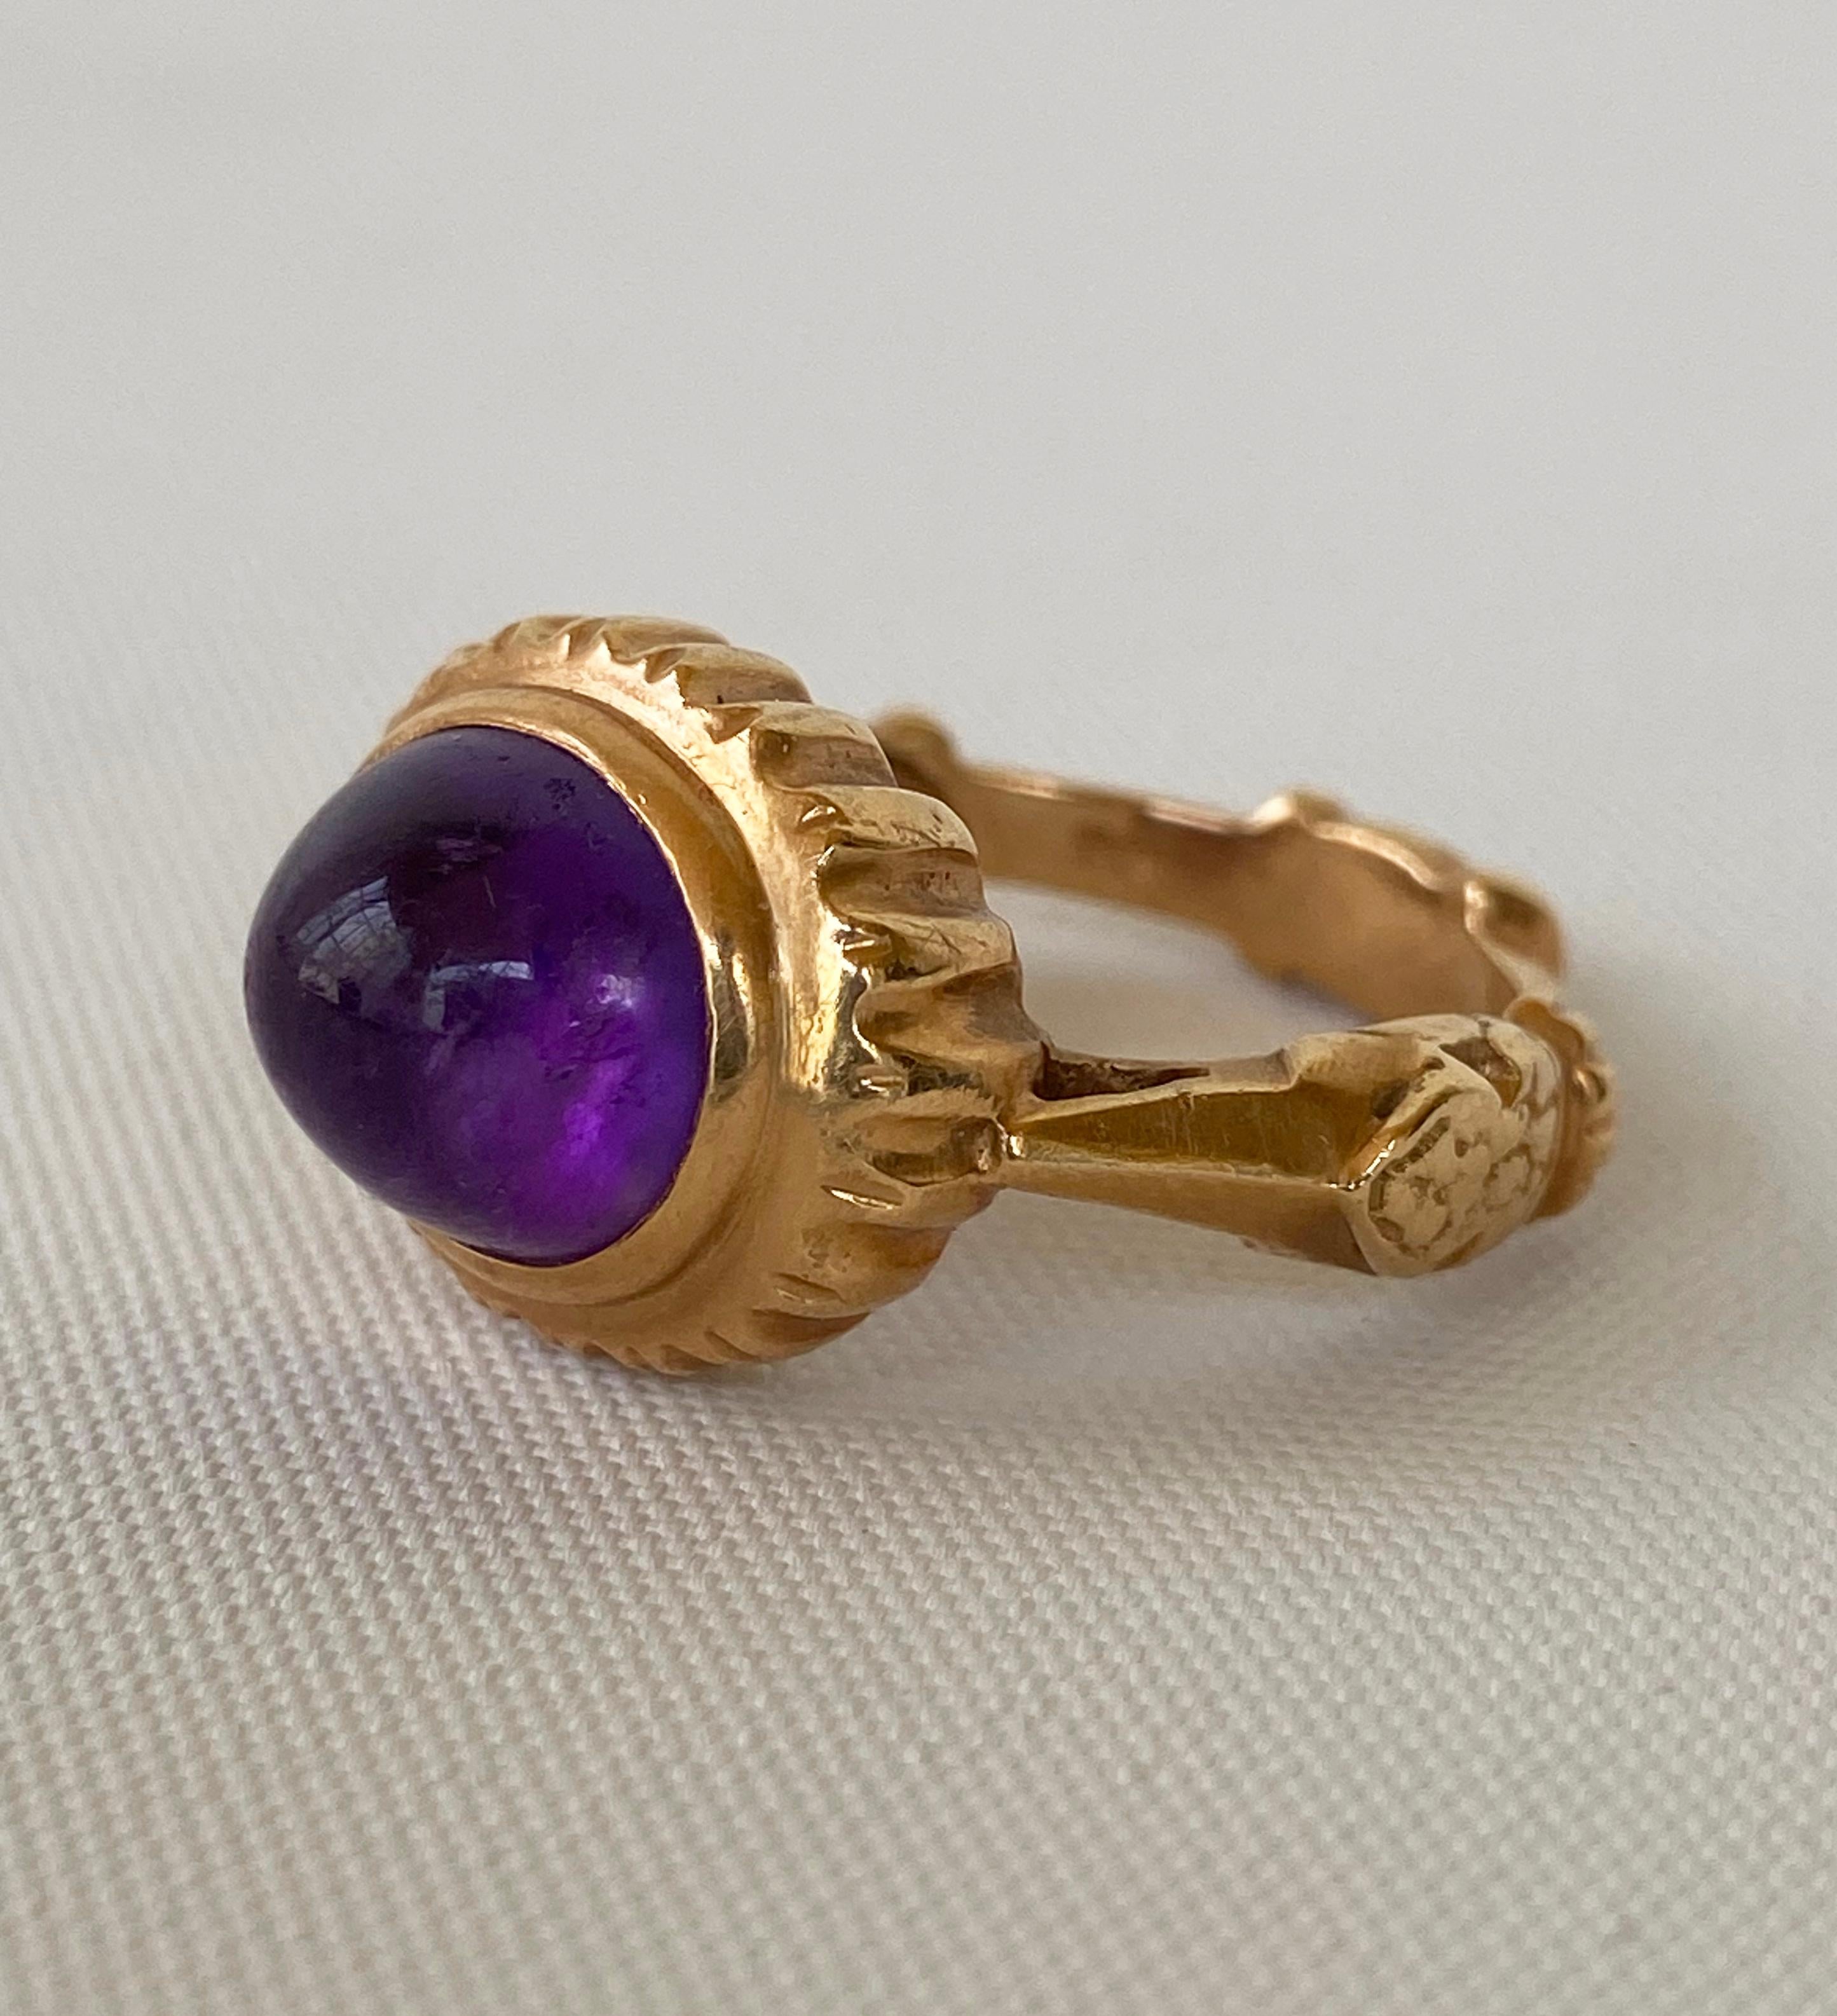 Unique and elegant custom ring by Marina J. This amazing decorative ring is cast with all solid 14k Yellow Gold, and stamped as so on inside the band. This ring features a stunning dome shaped Amethyst that is bezel set into the sun like